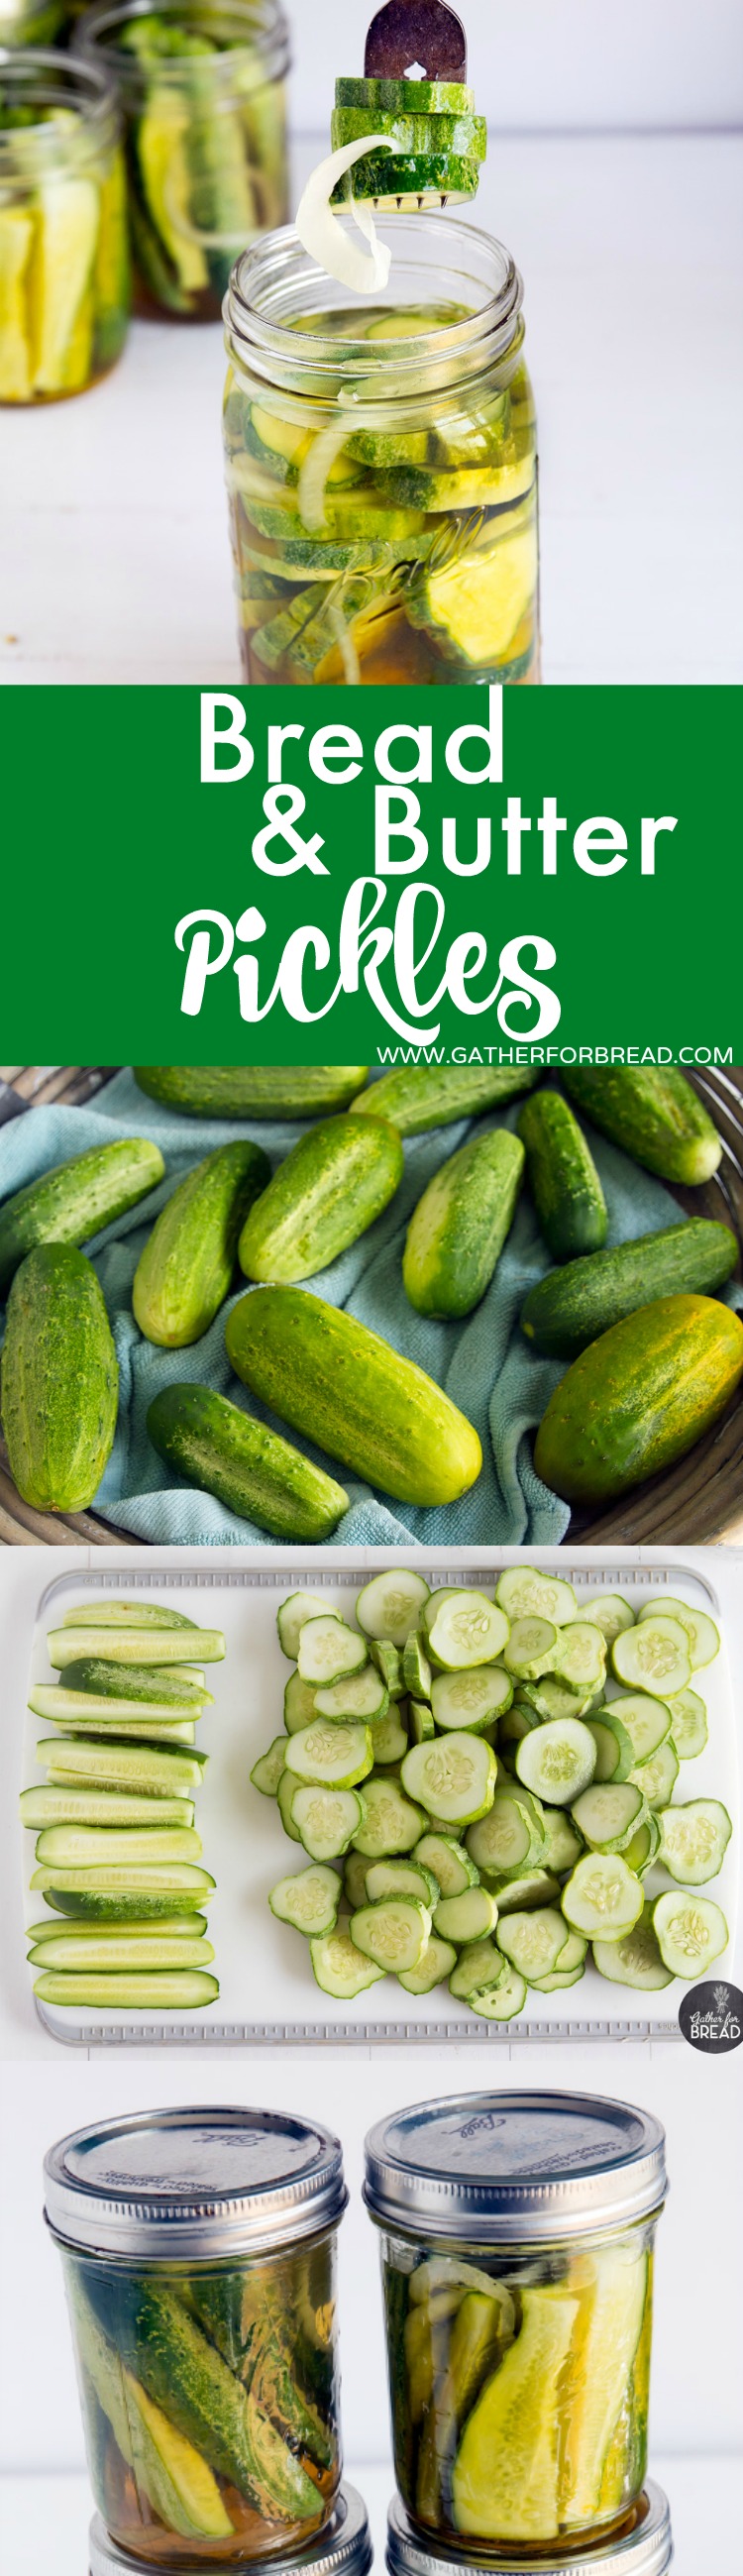 Bread and Butter Refrigerator Pickles - Quick sweet, crunchy refrigerator pickles. No heating, no canning, easy small batch recipe. Make fresh sweet pickles for summer.